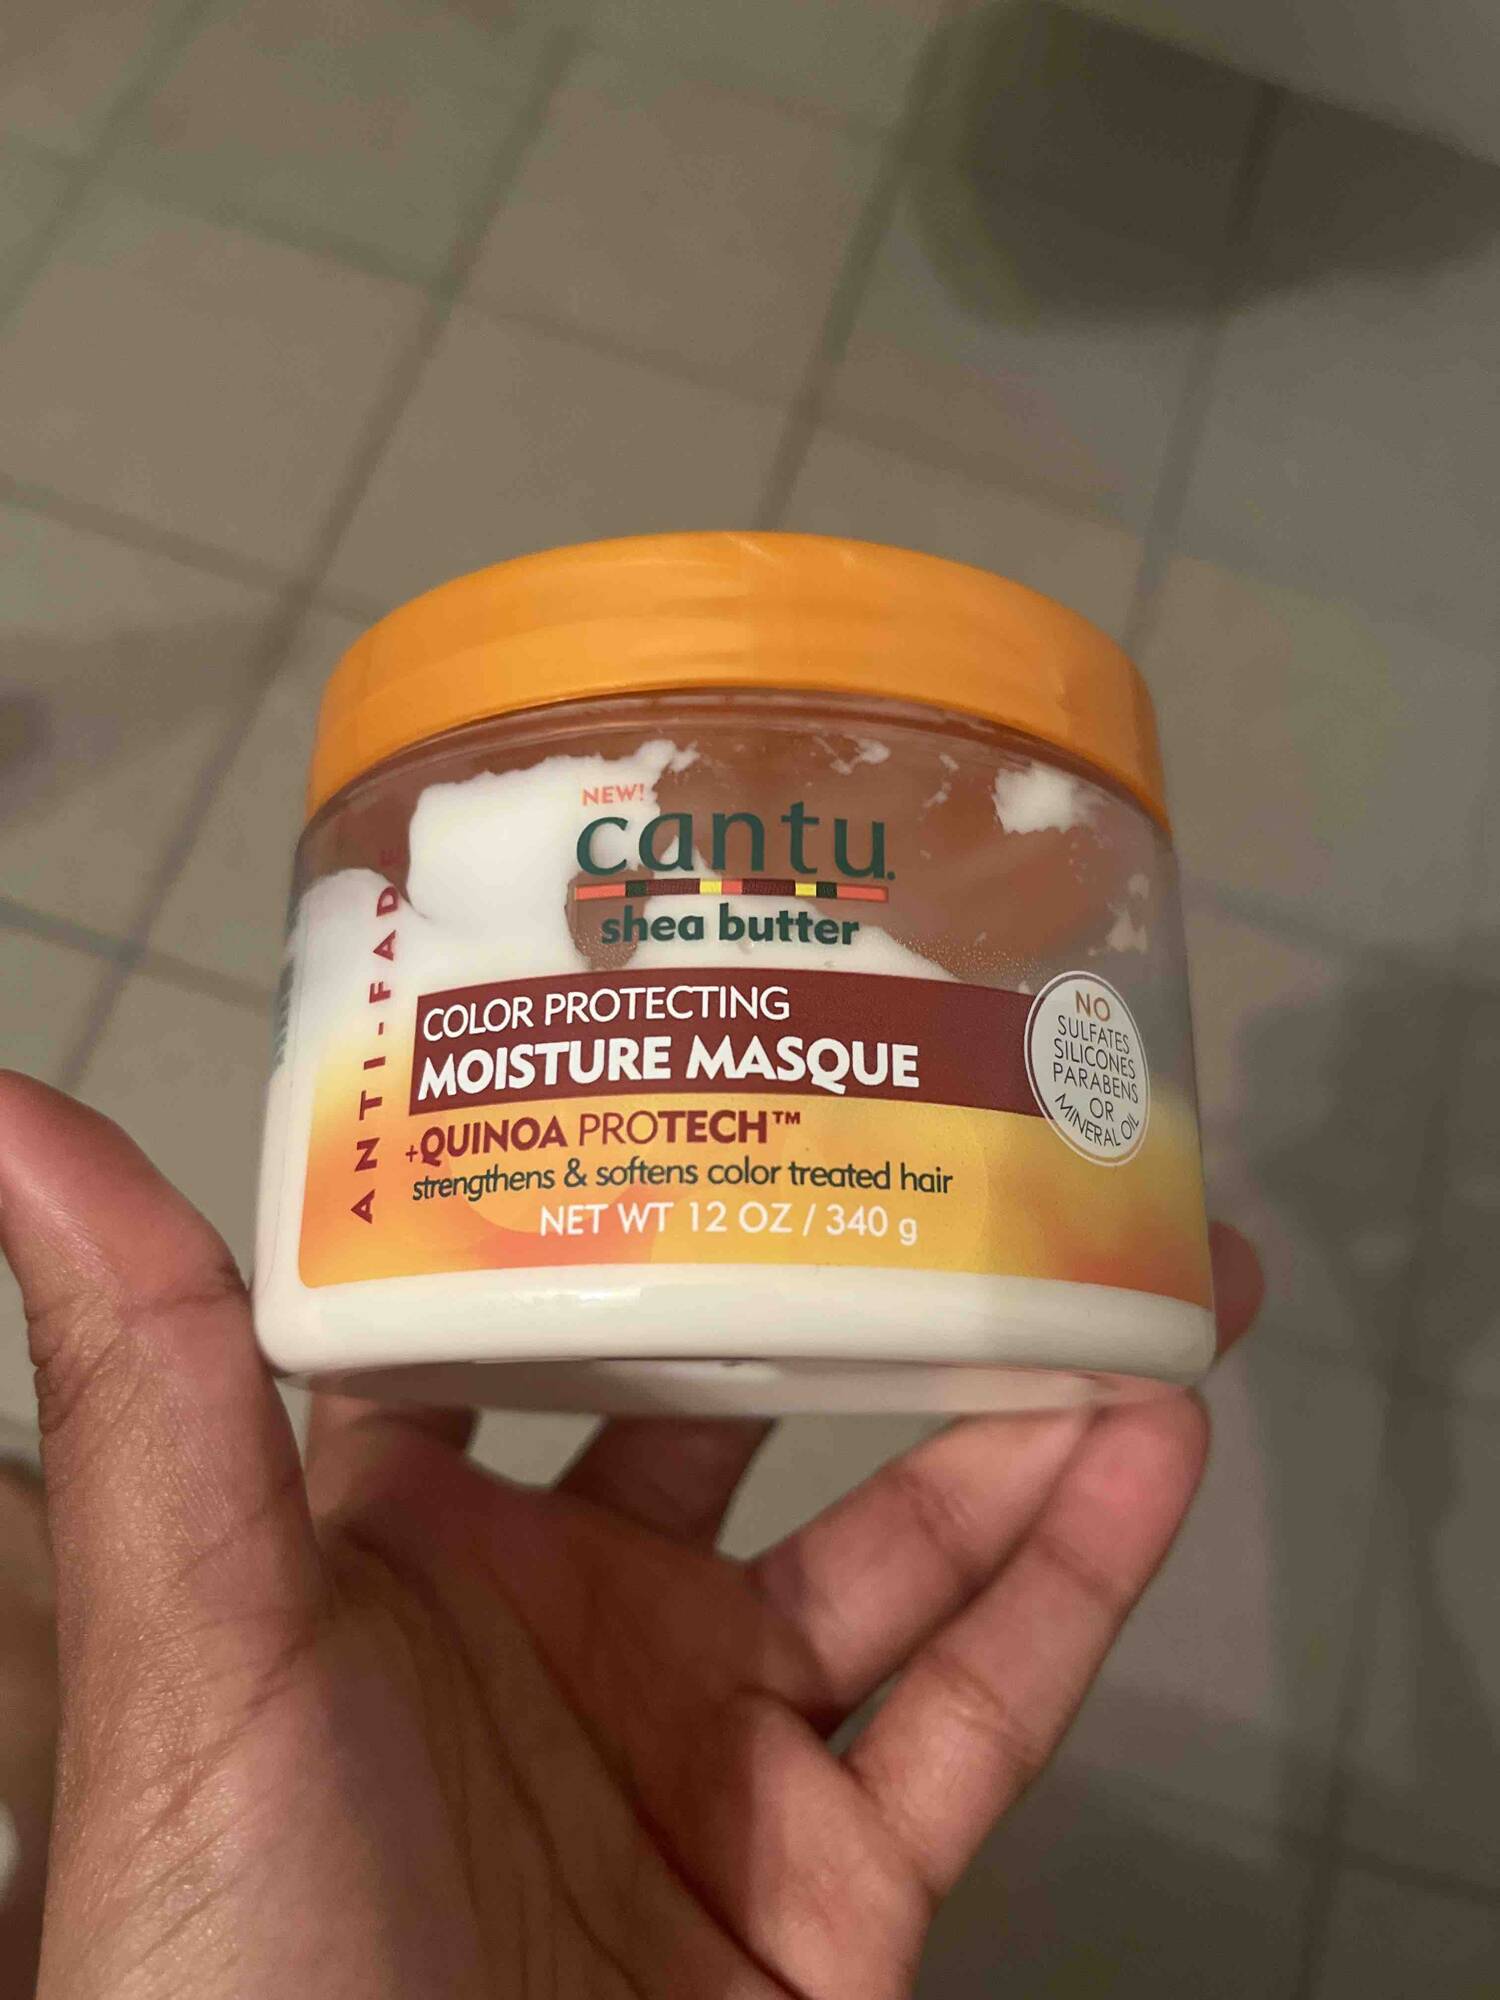 CANTU - Shea butter - Color protecting moisture masque